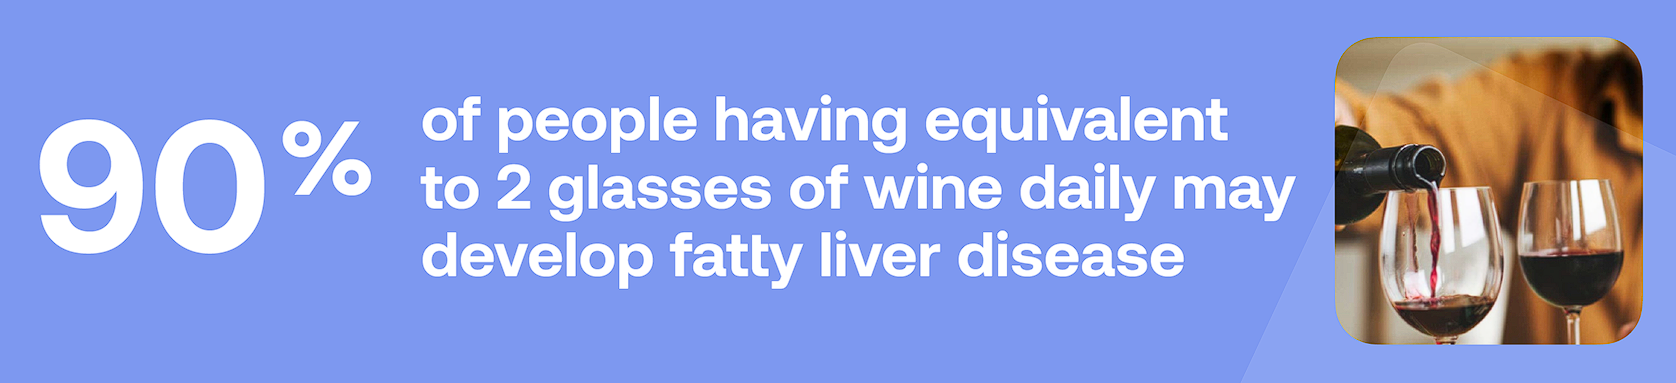 90% of people having equivalent to 2 glasses of wine daily may develop fatty liver disease